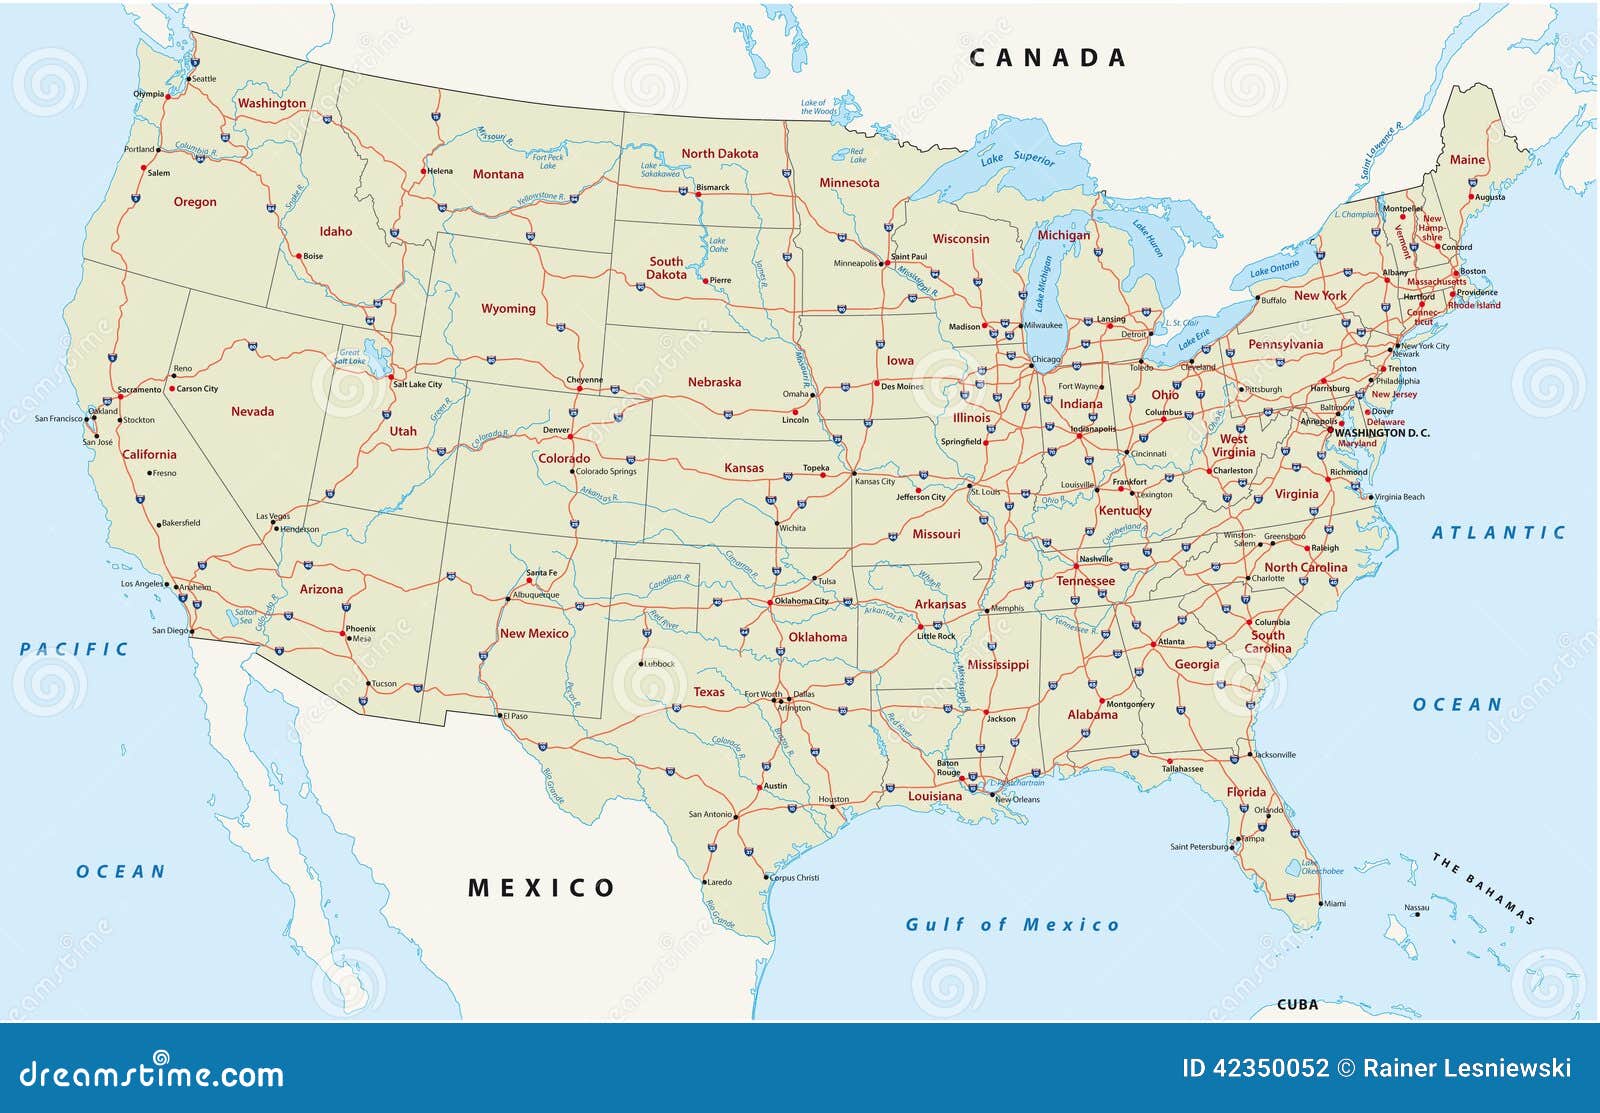 us interstate highway map united states main streets highways 42350052